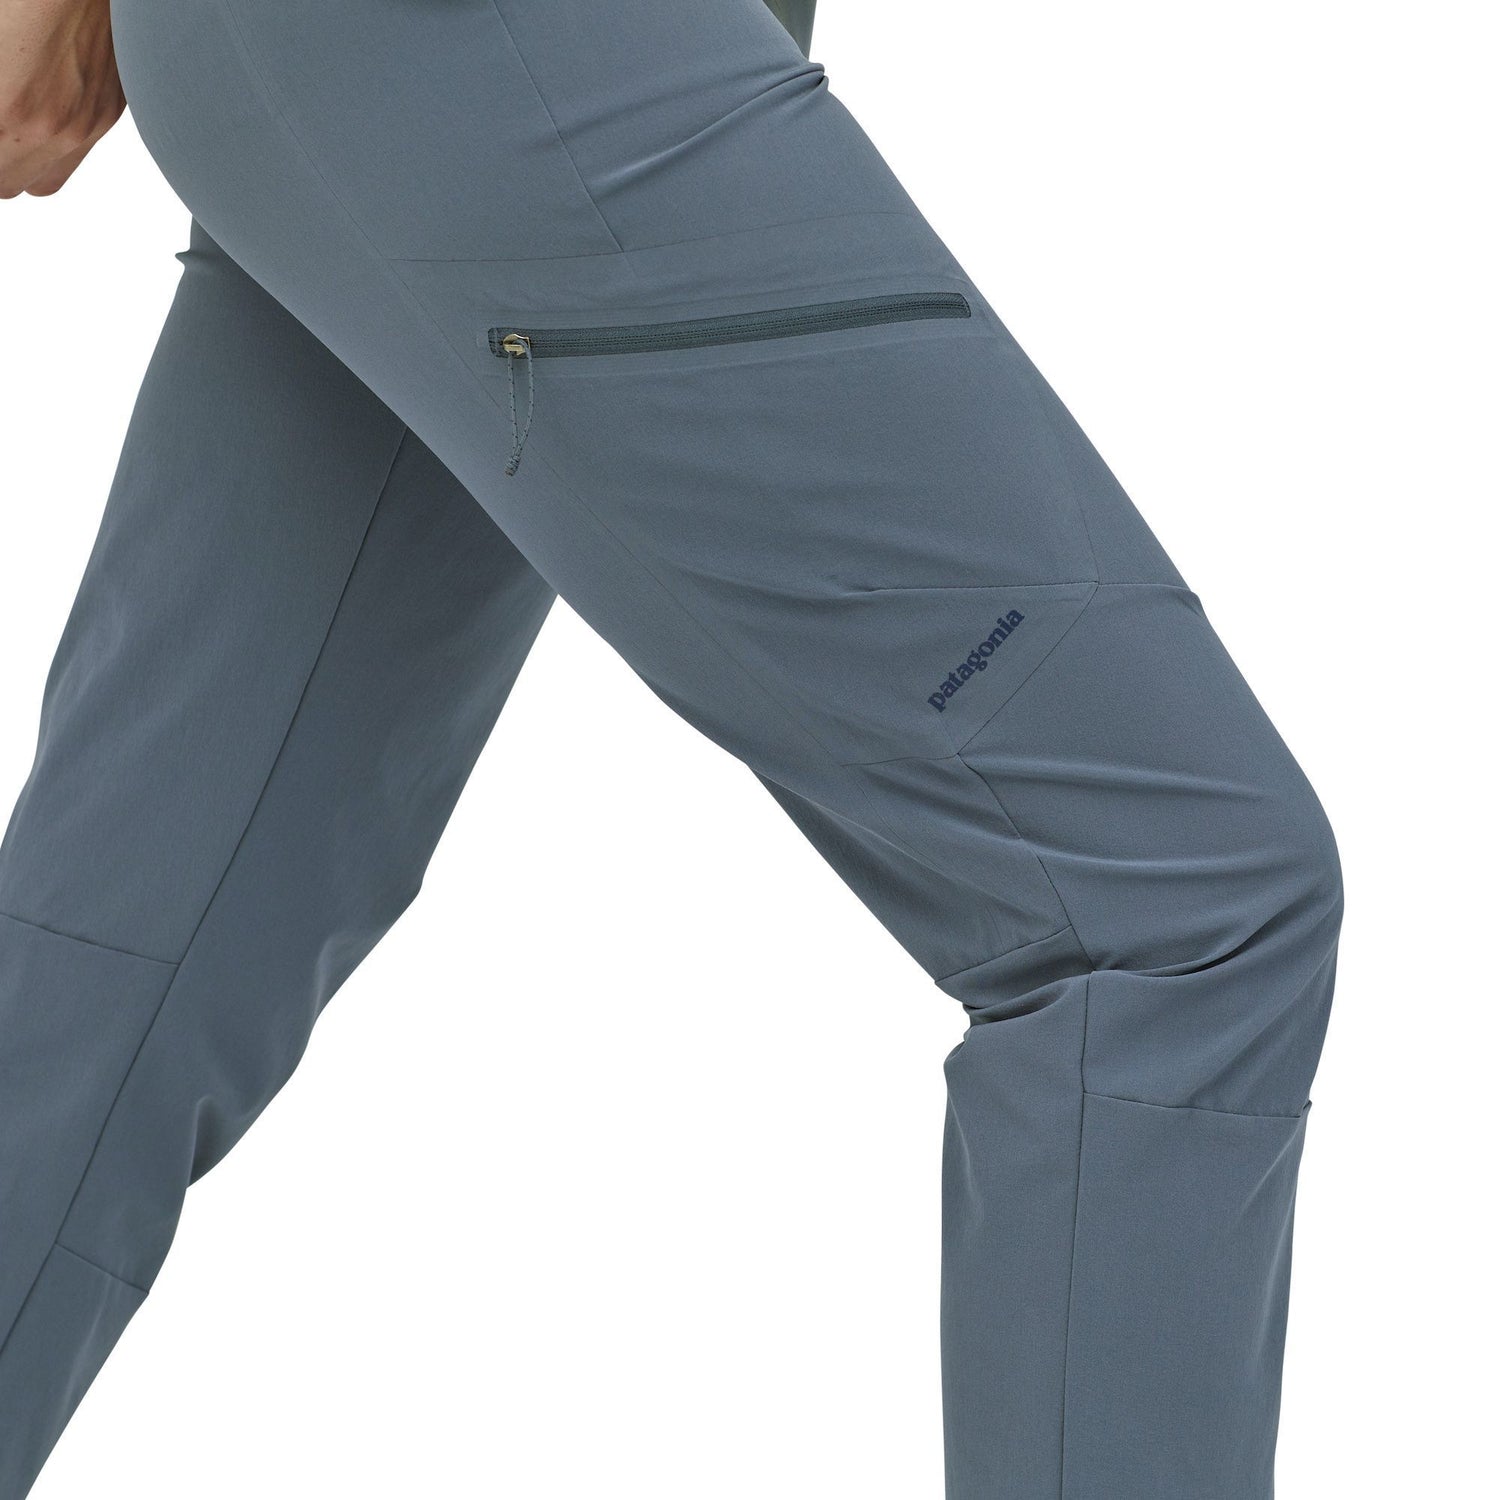 Patagonia W's Chambeau Rock Pants - Recycled Polyester Feather Grey Pants